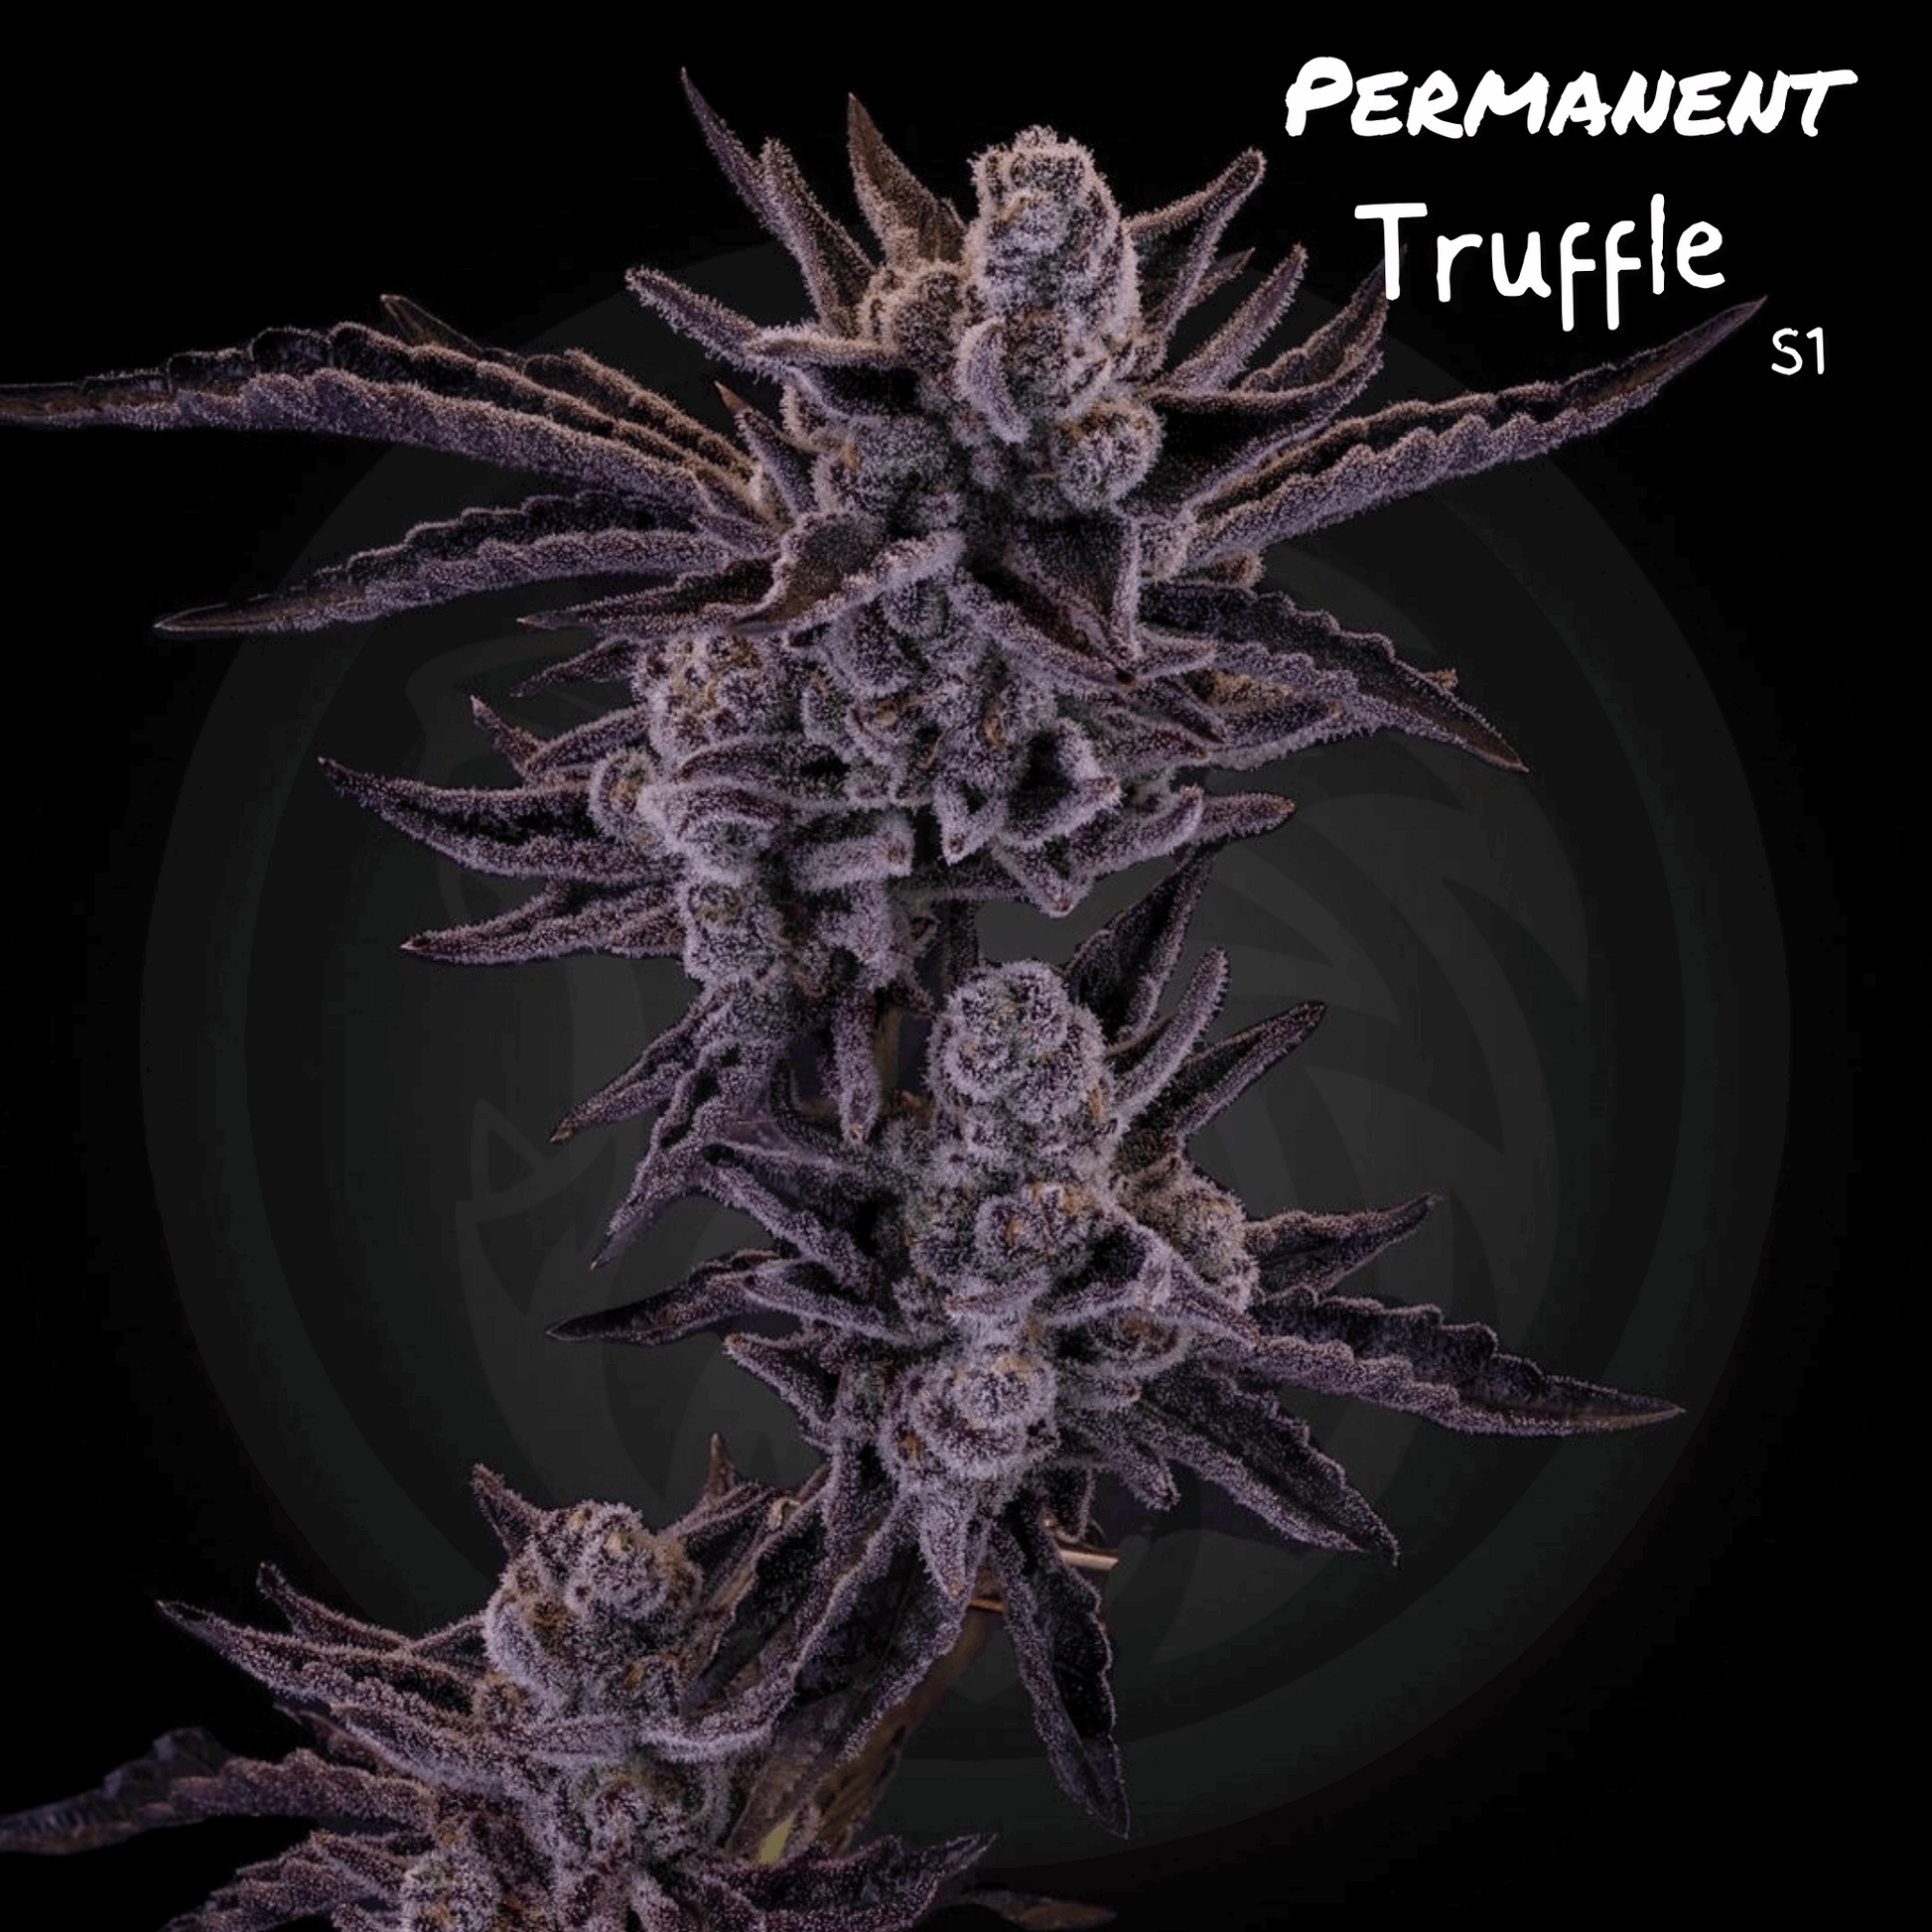 Permanent Truffle, Permanent Chimera S1 White Truffle x Permanent Marker Seed Junky Cannabis Seeds